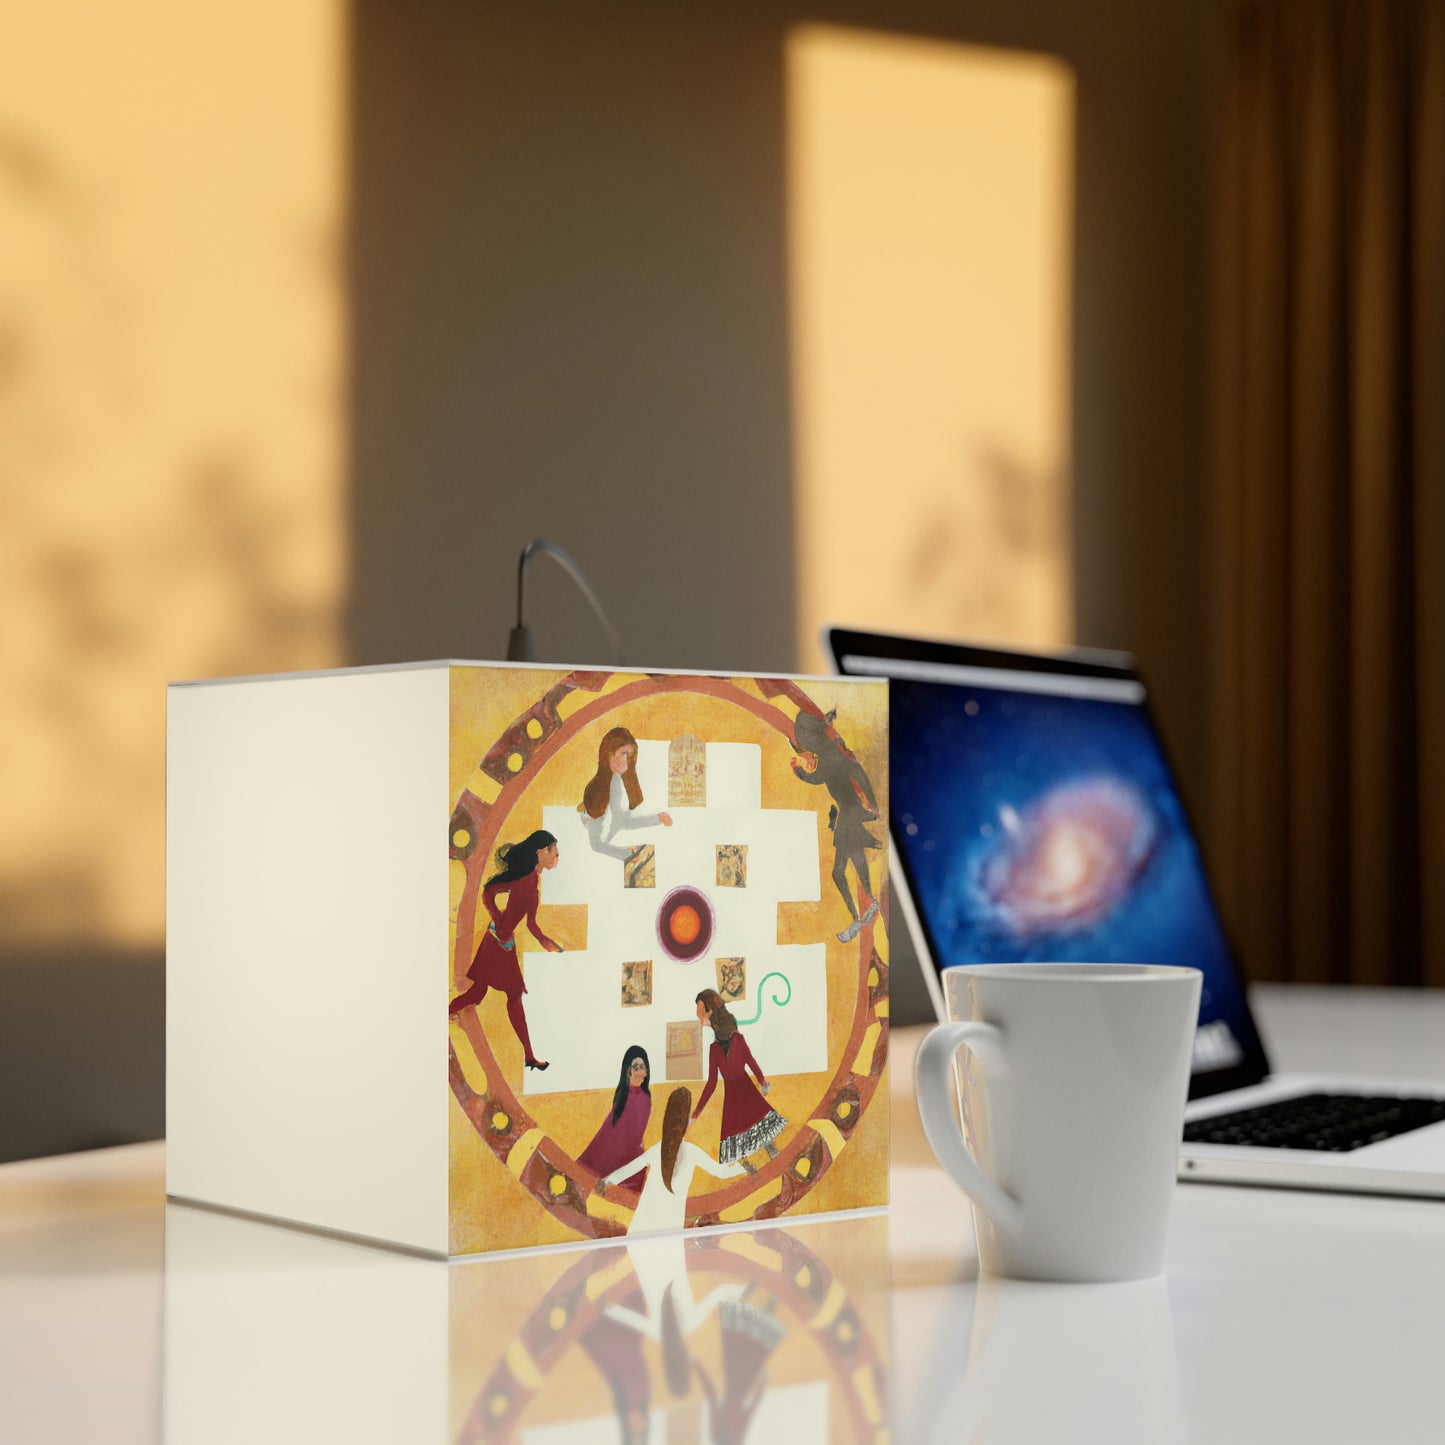 The Castle Caper: A Battle of Wits and Adventure - The Alien Light Cube Lamp